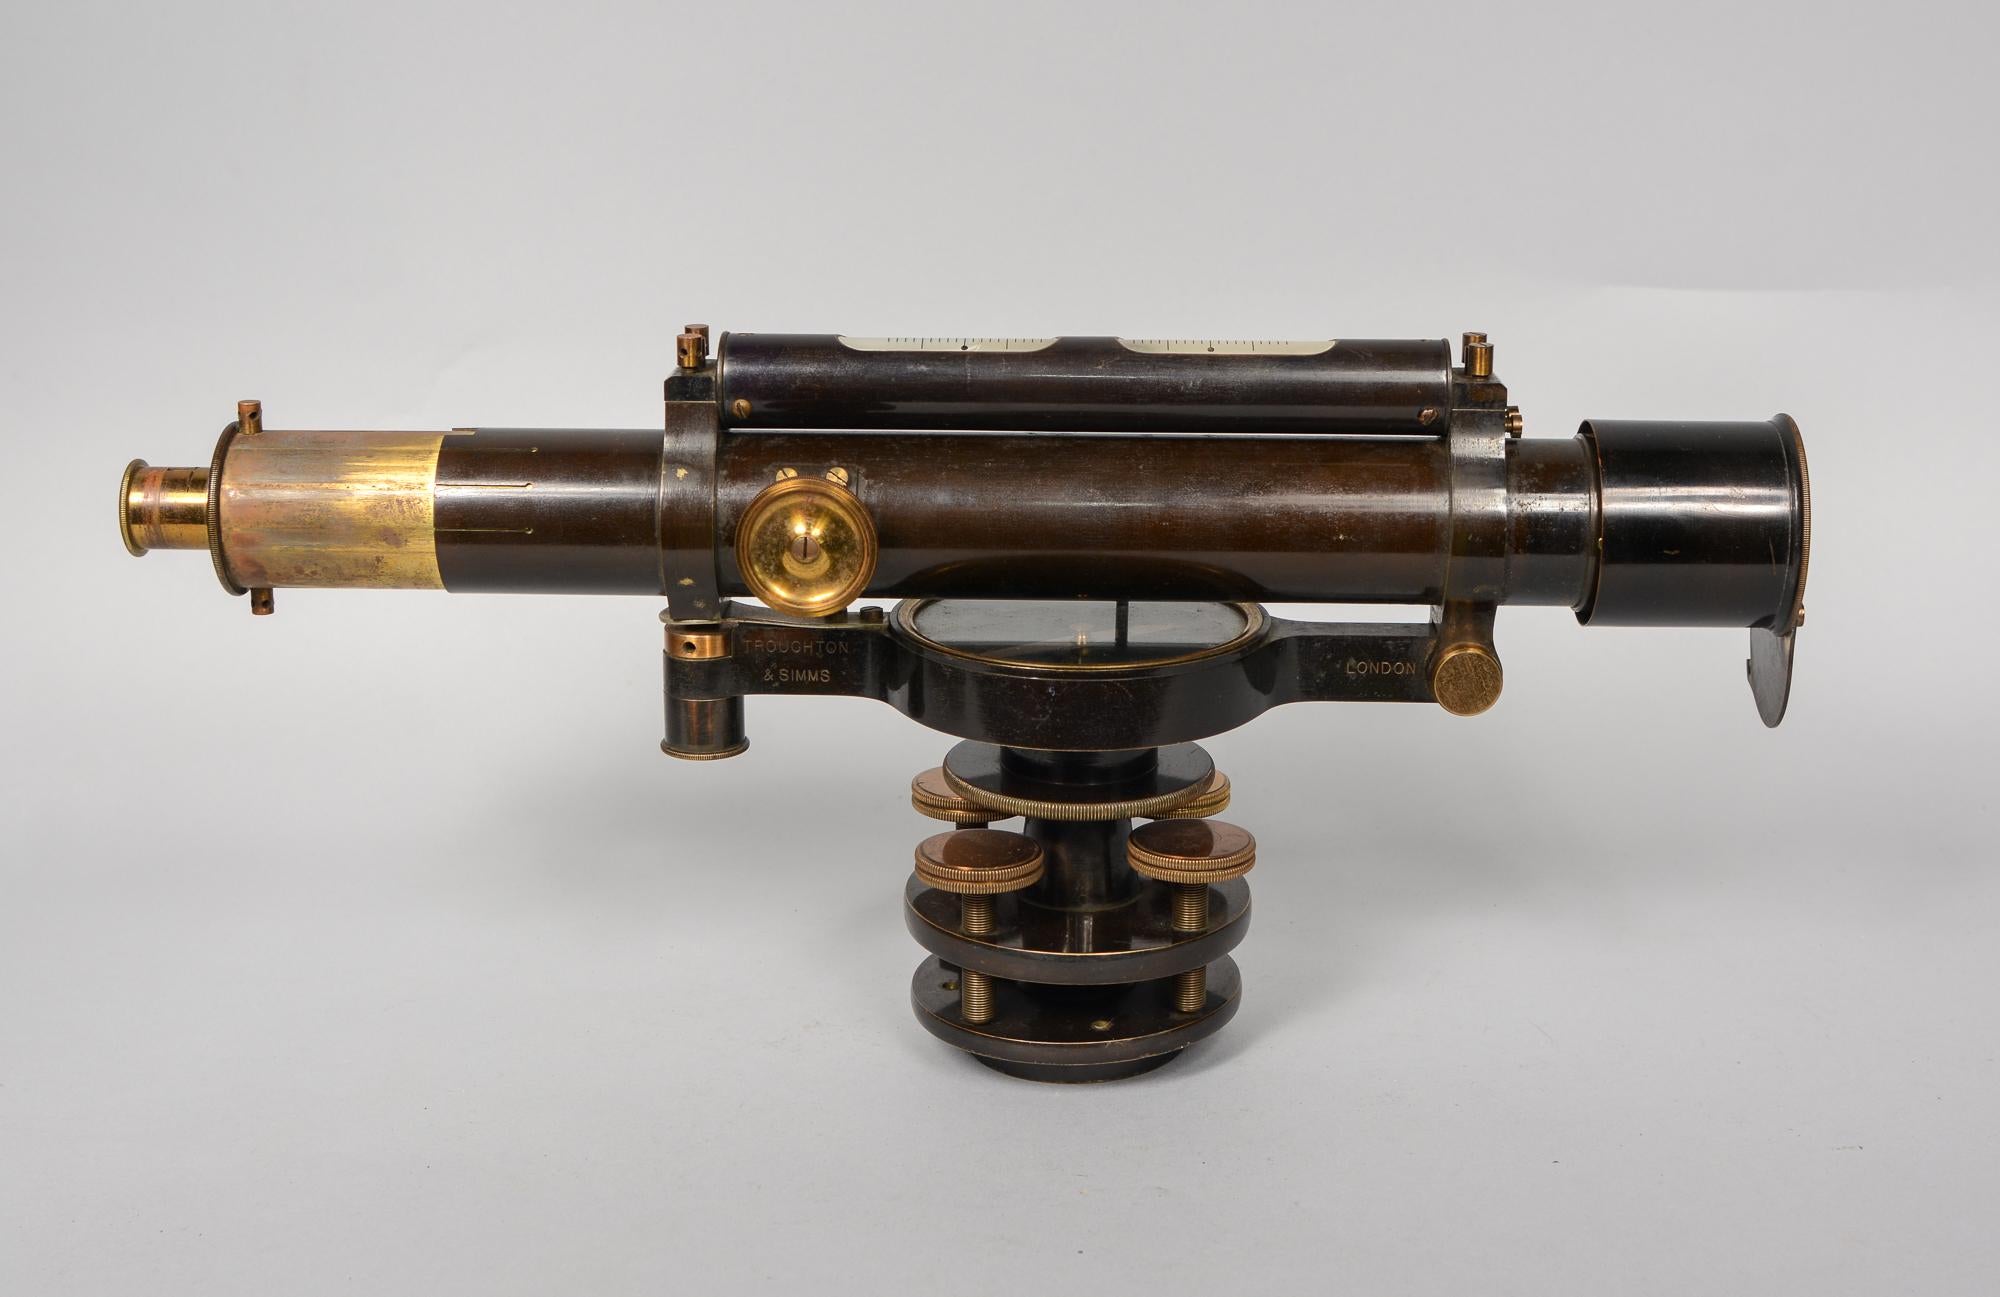 Early 20th century surveyor's level made be Troughton and Simms of London. This comes in its original mahogany case. The dimensions listed are for the case. The level measures 3.75 inches deep, 7 inches tall and 13 inches long with the tubes